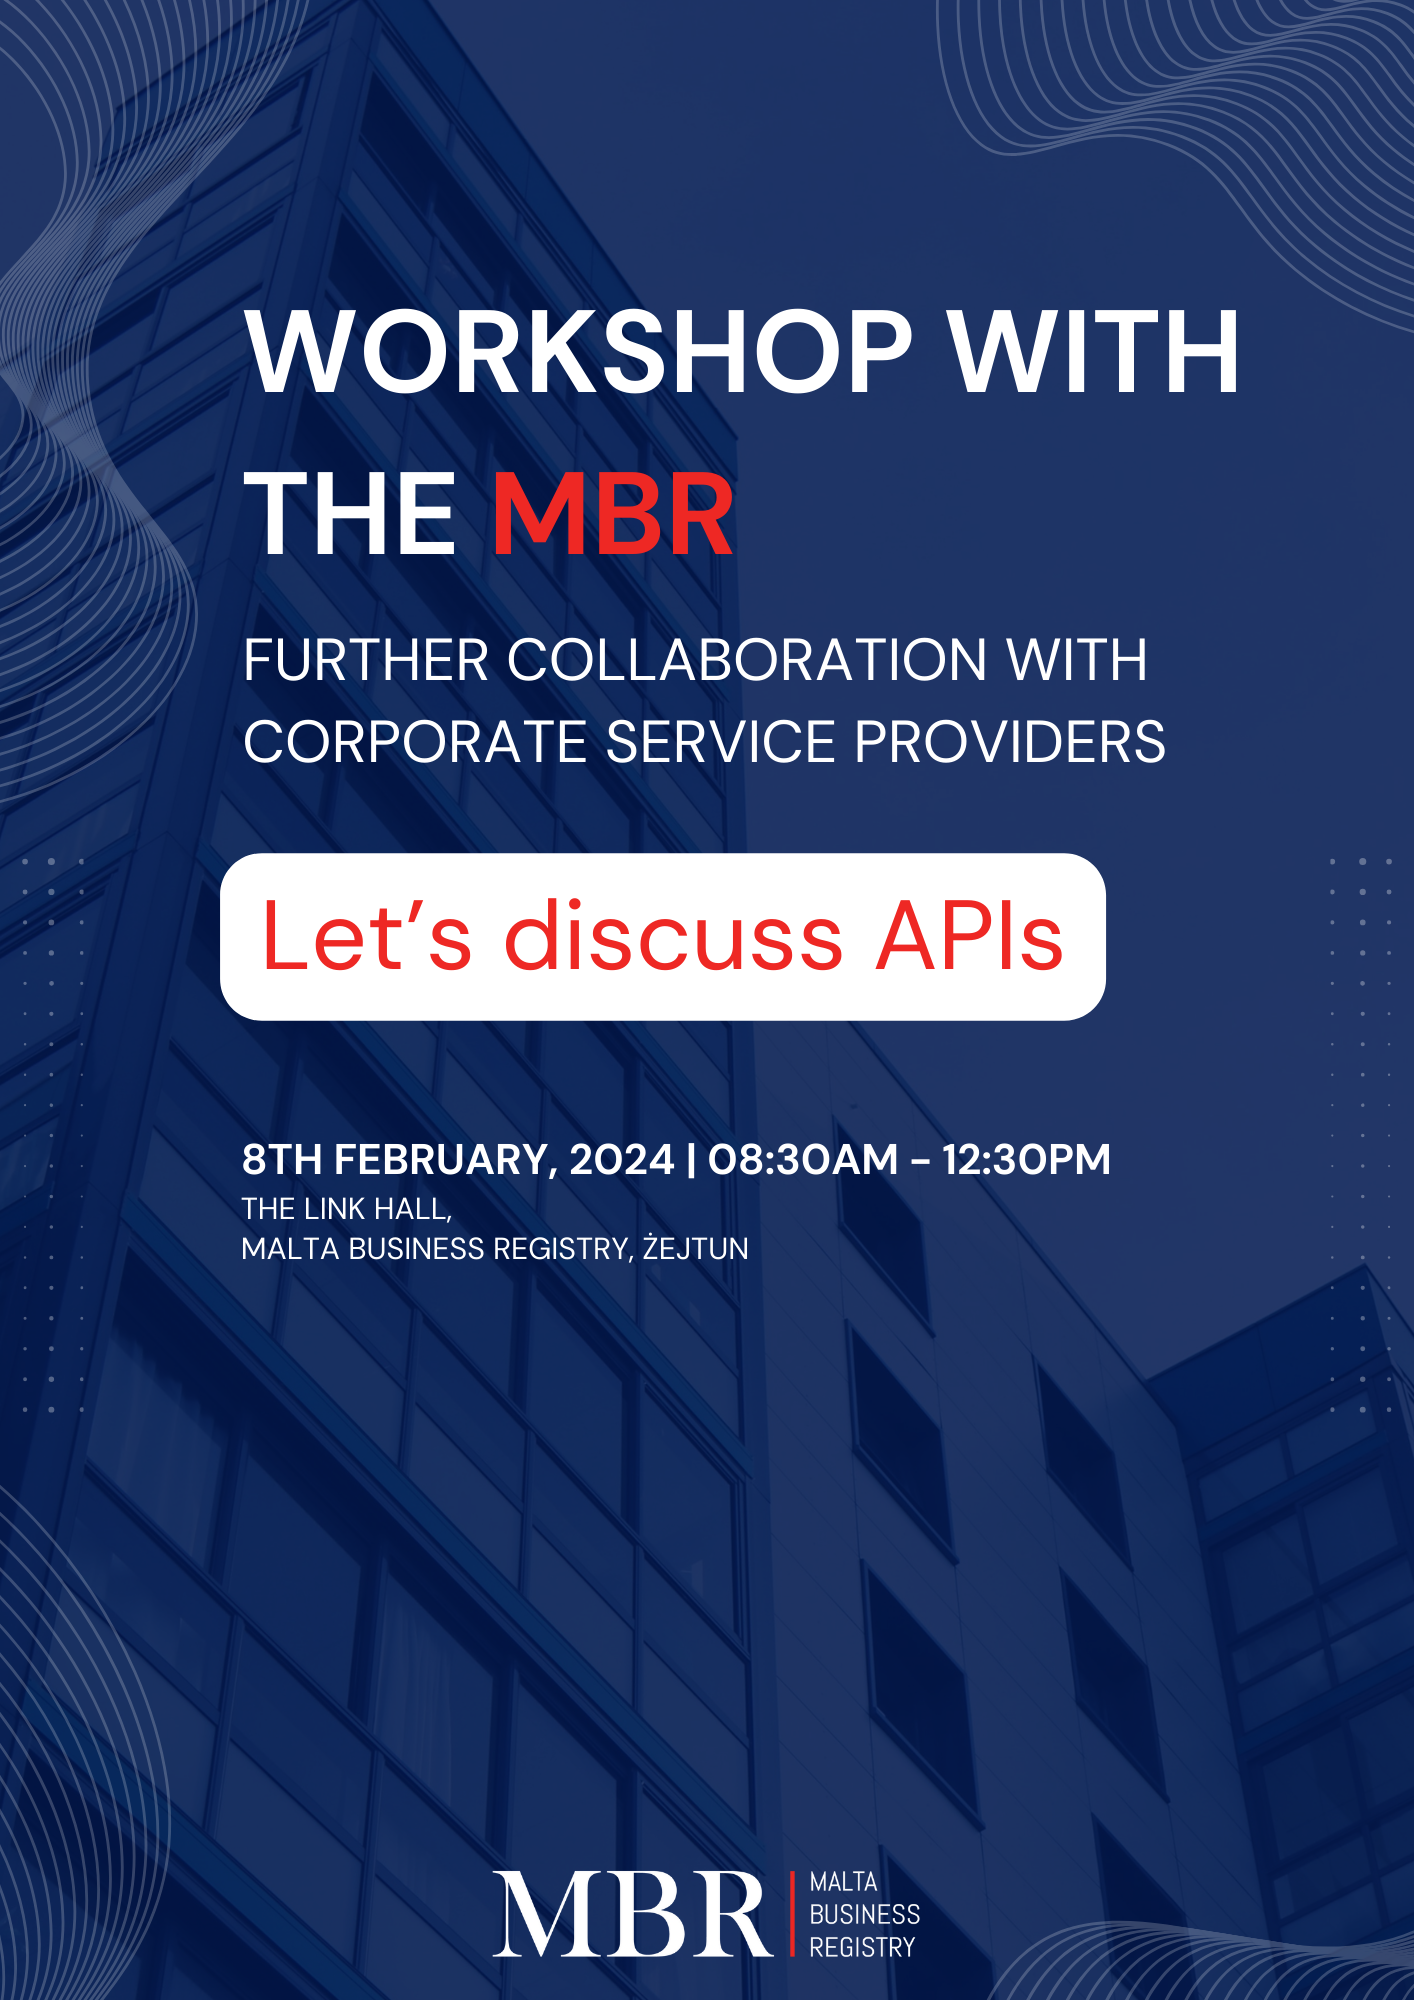 MBR’s Workshop - Further collaboration with Corporate Service Providers (Let’s discuss APIs) poster